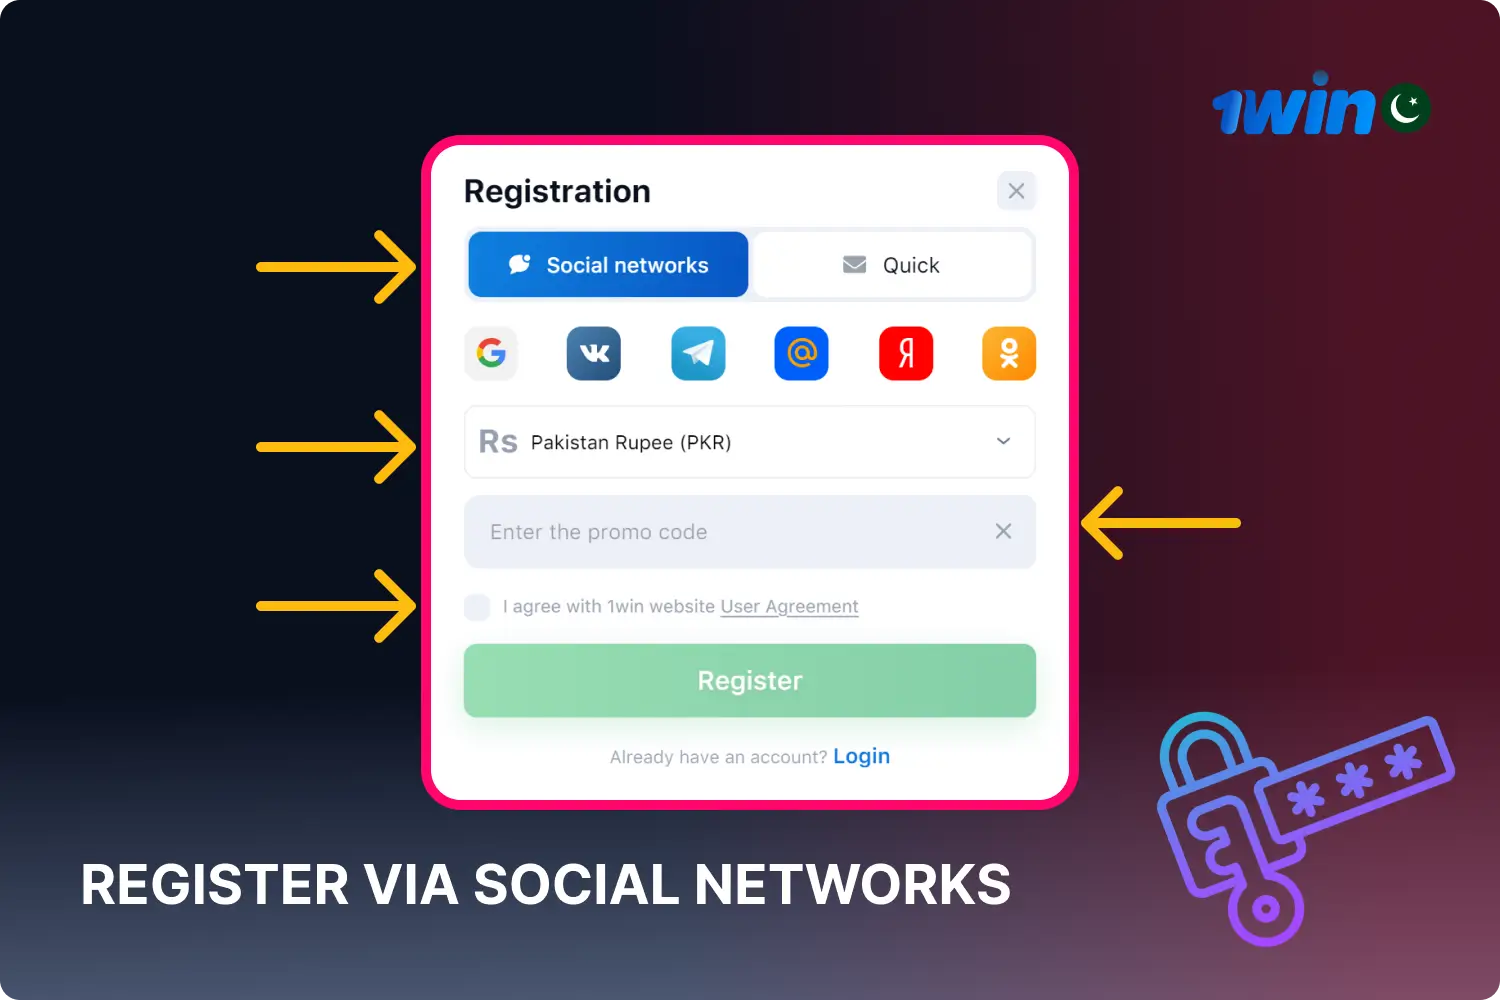 Users from Pakistan can register for 1win using their social network accounts